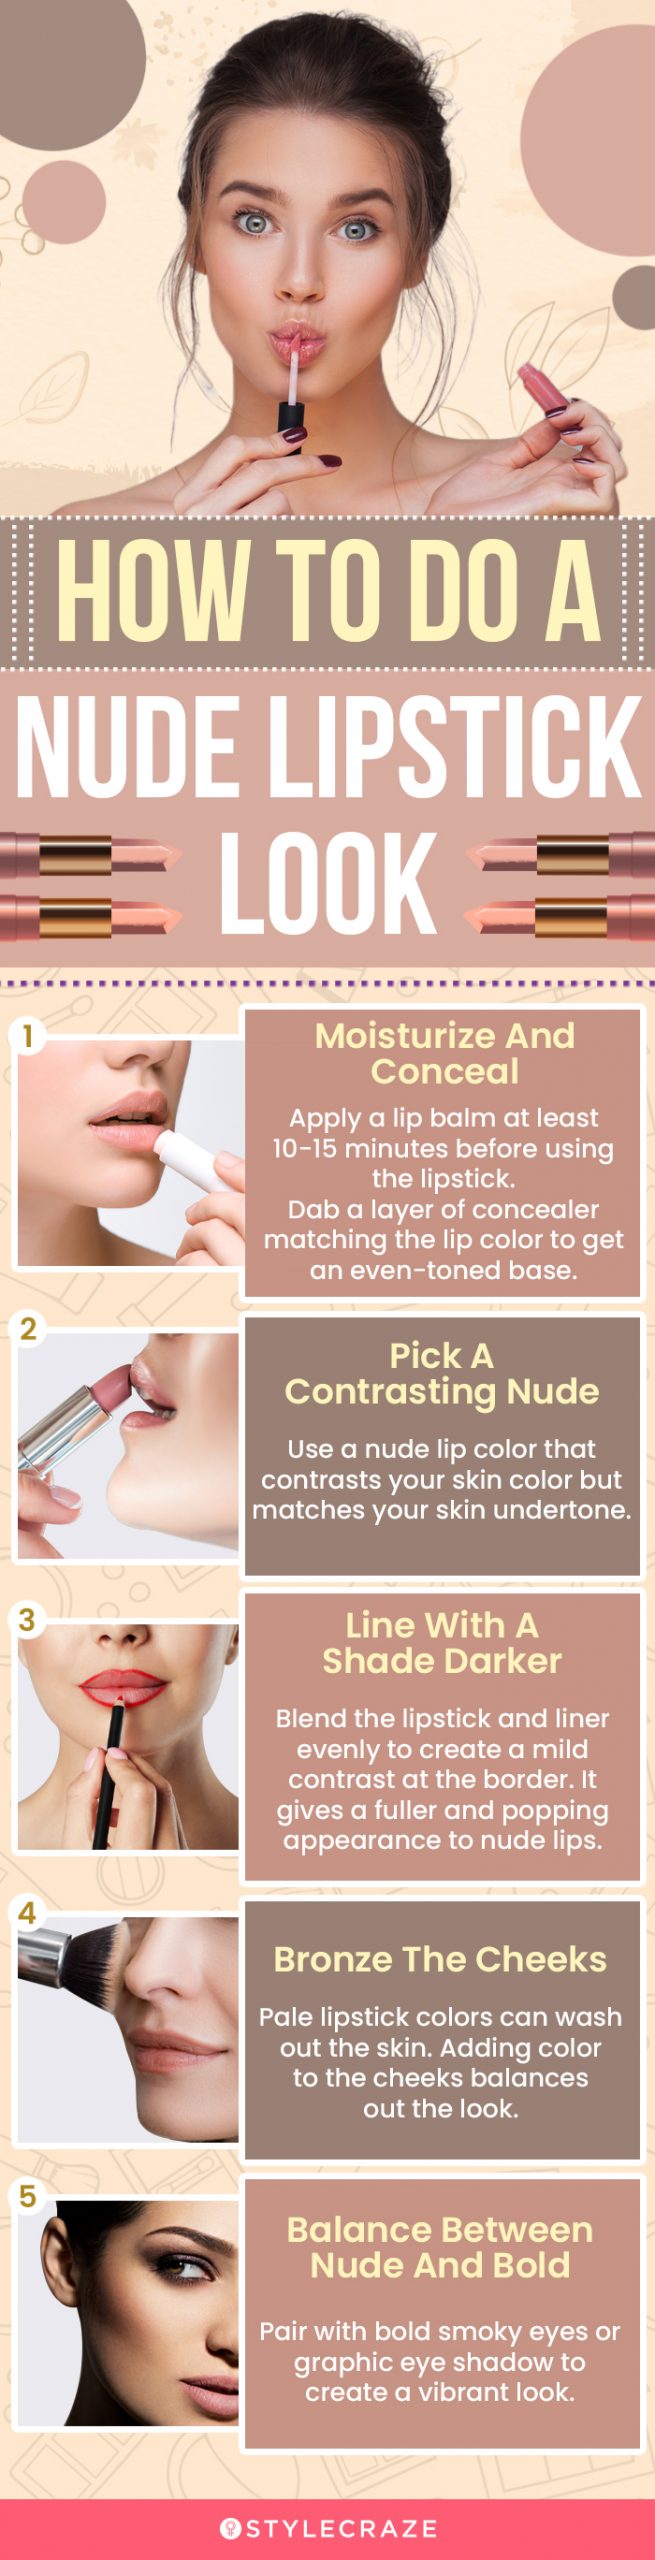 How To Do A Nude Lipstick Look (infographic)